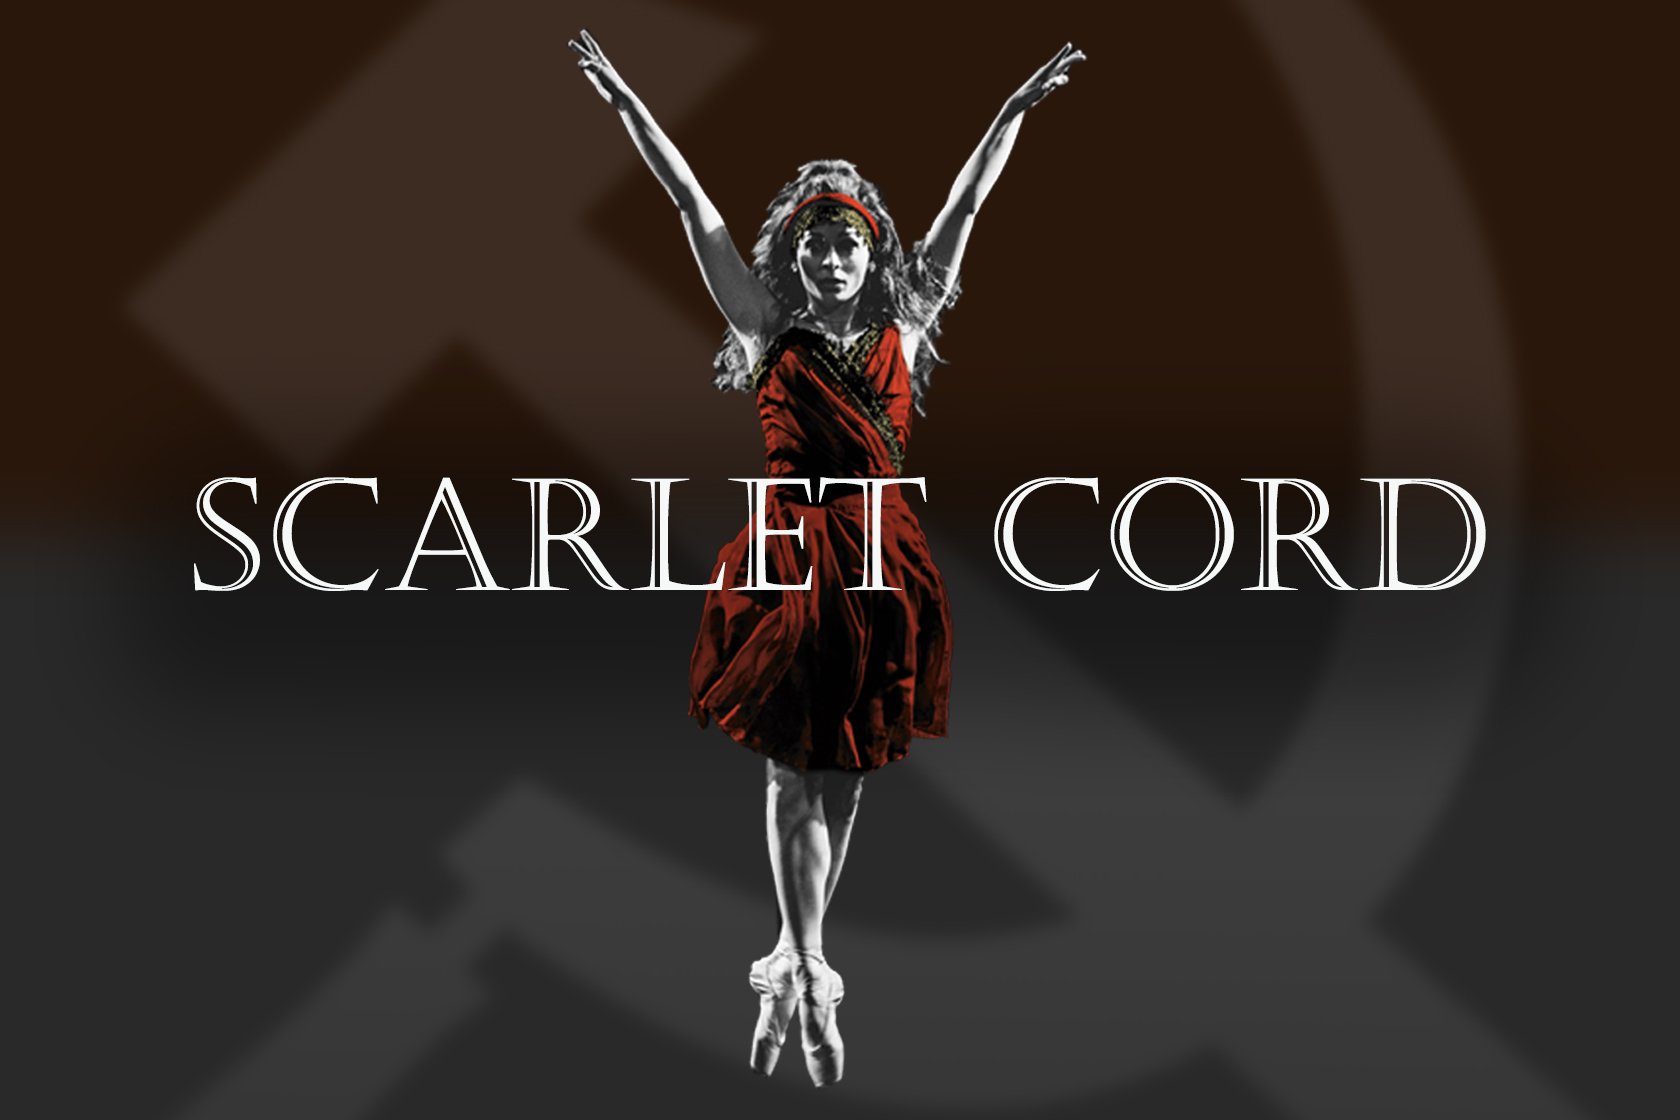 Ballet Magnificent - scarlet cord event poster